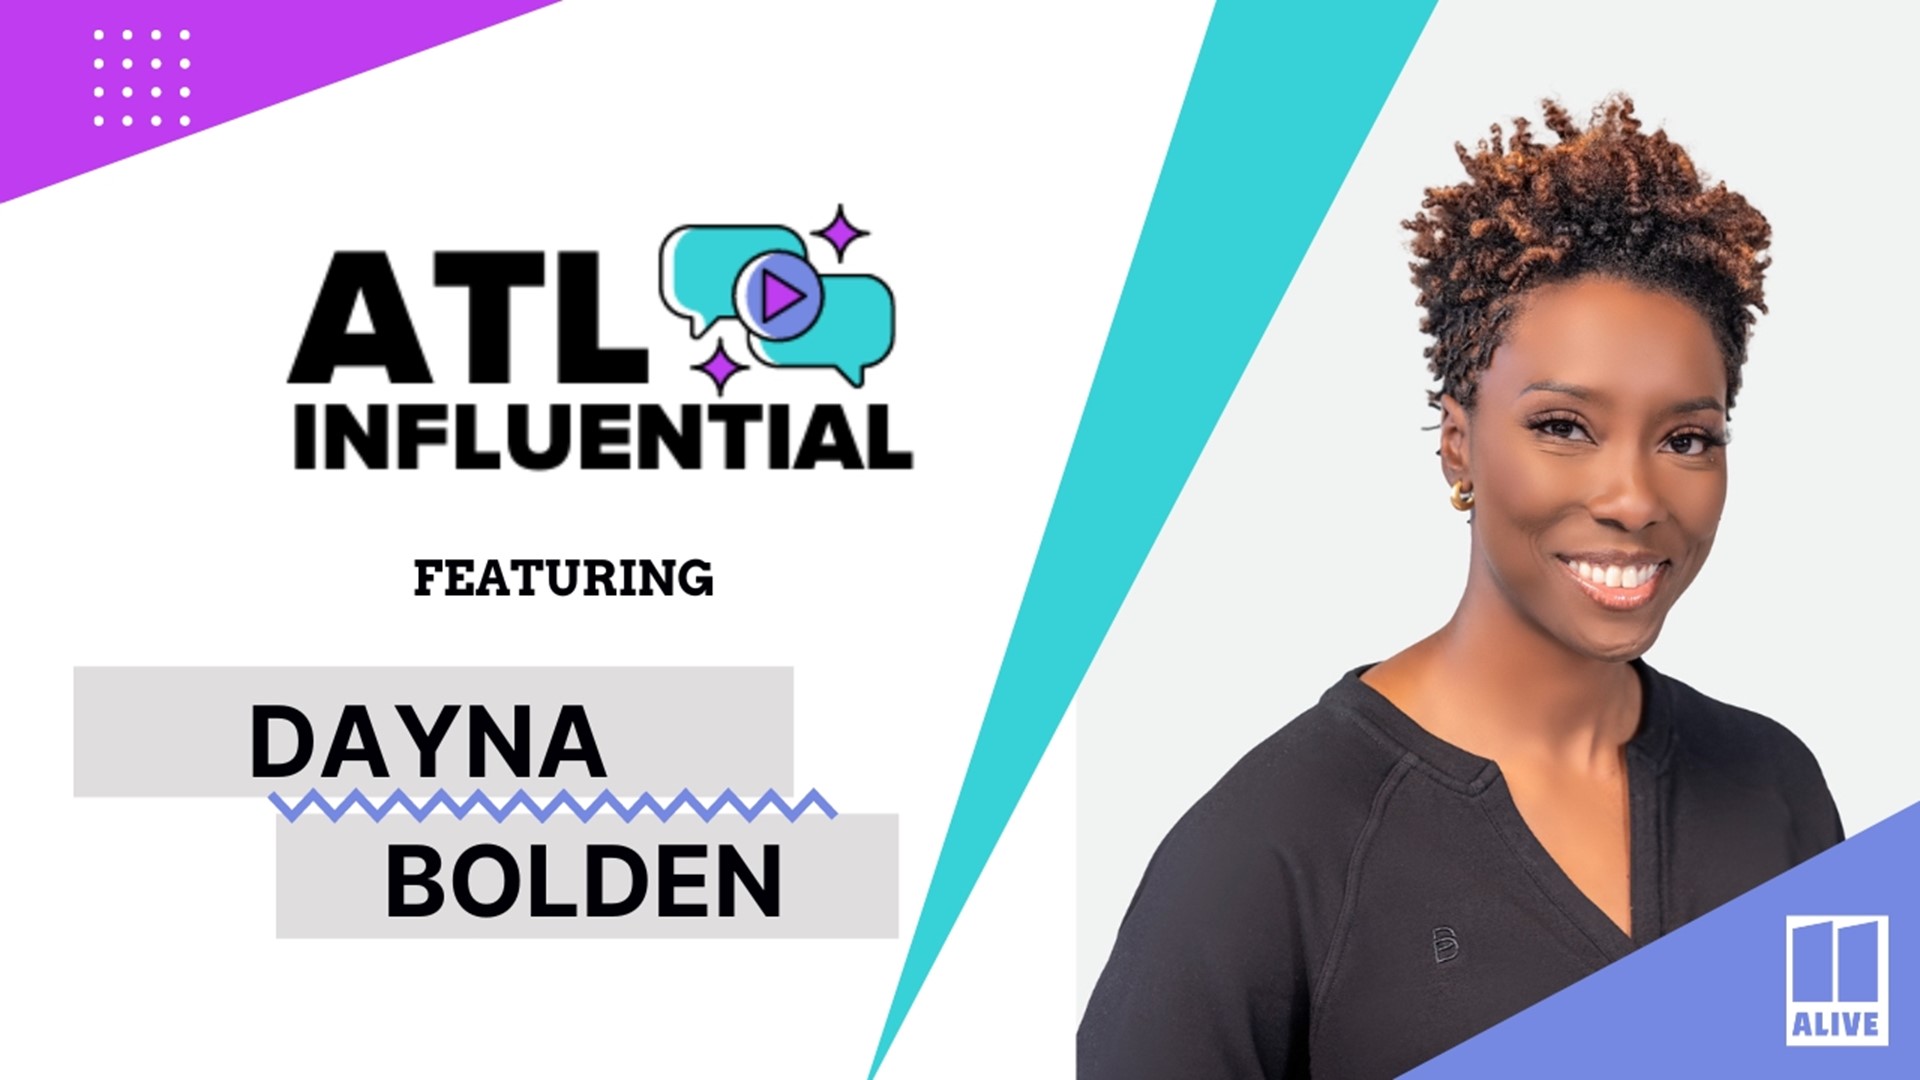 ATL Influential host Tianne Johnson chats with Dayna Bolden, CEO of Bolden Creative Media, about her mission to inspire women to chase their dreams.